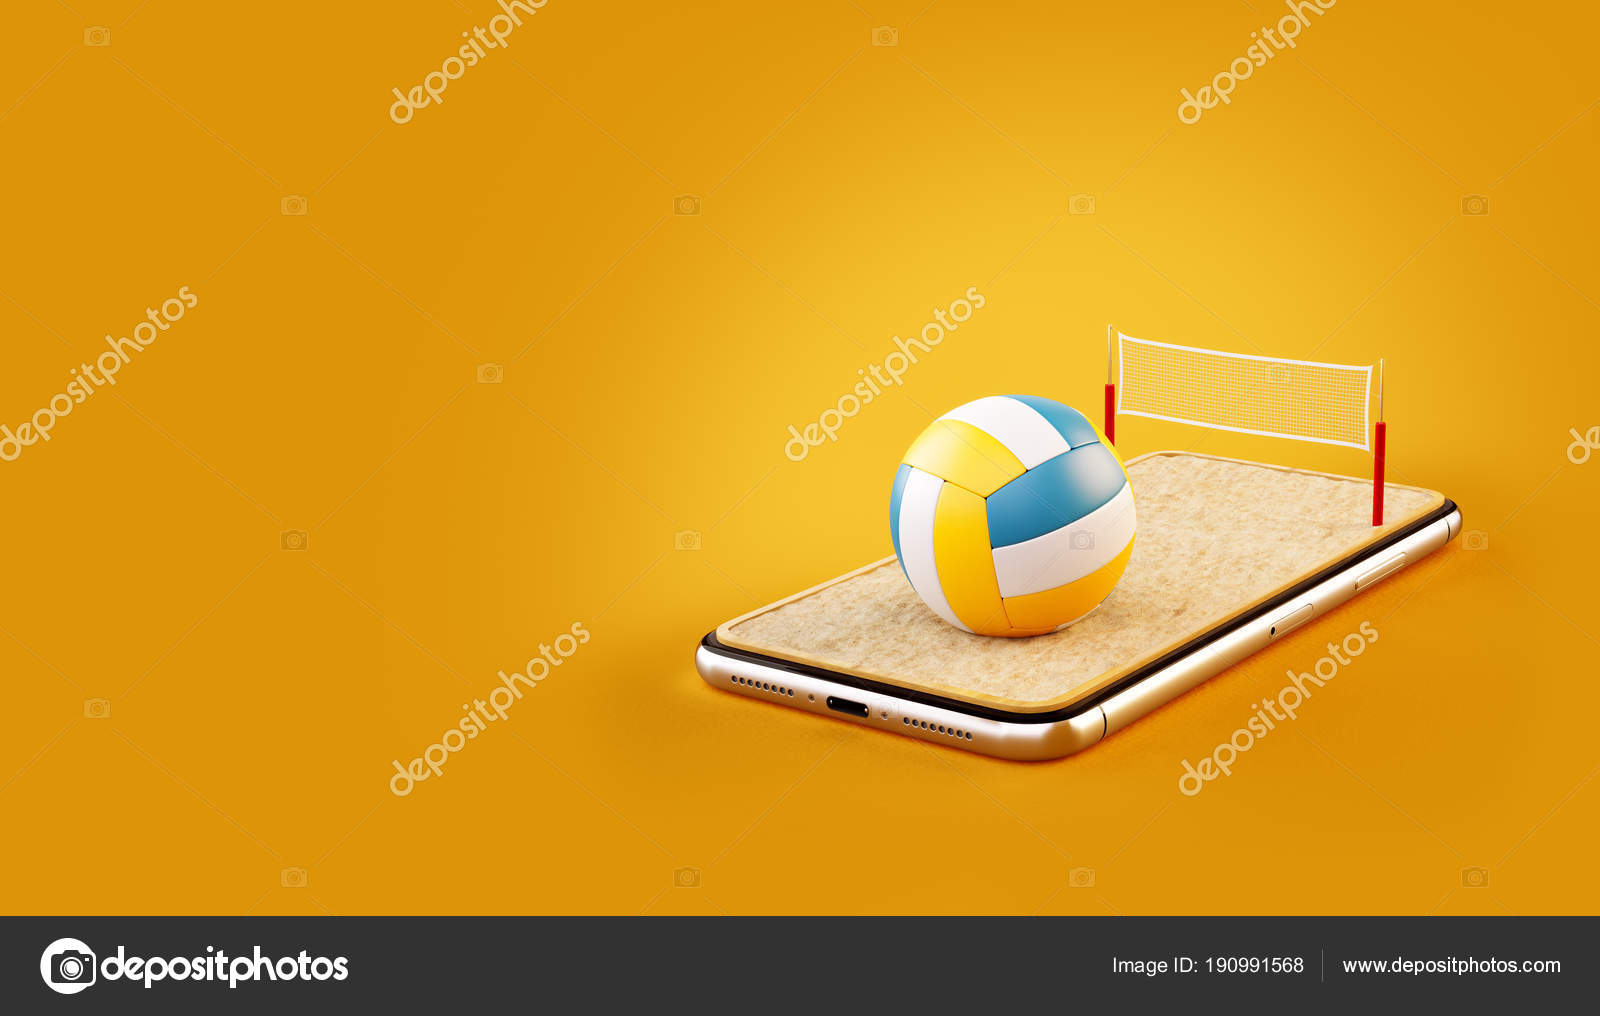 Unusual 3d illustration of a volleyball ball and on court on a smartphone screen